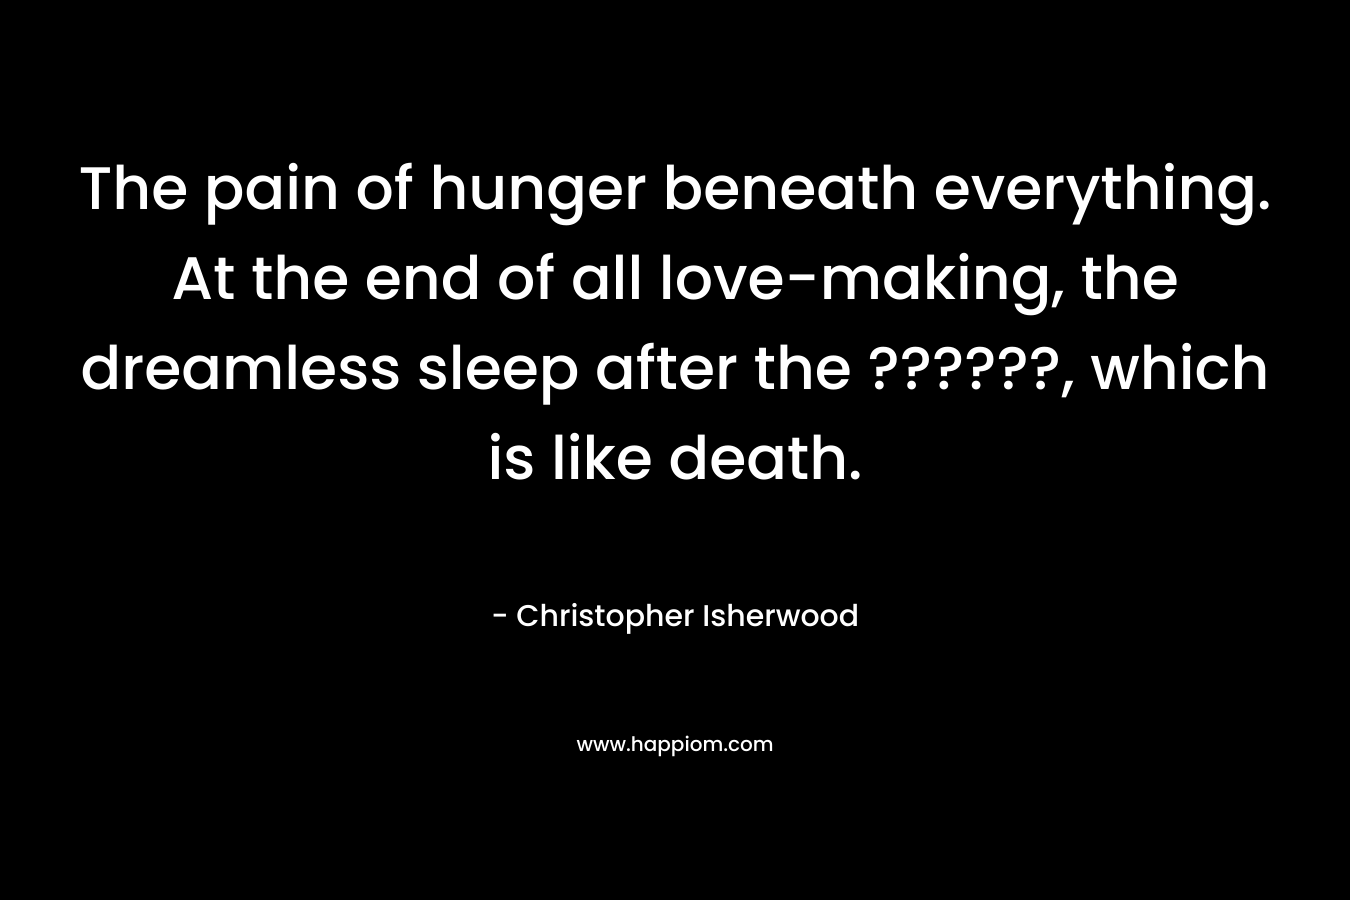 The pain of hunger beneath everything. At the end of all love-making, the dreamless sleep after the ??????, which is like death. – Christopher Isherwood